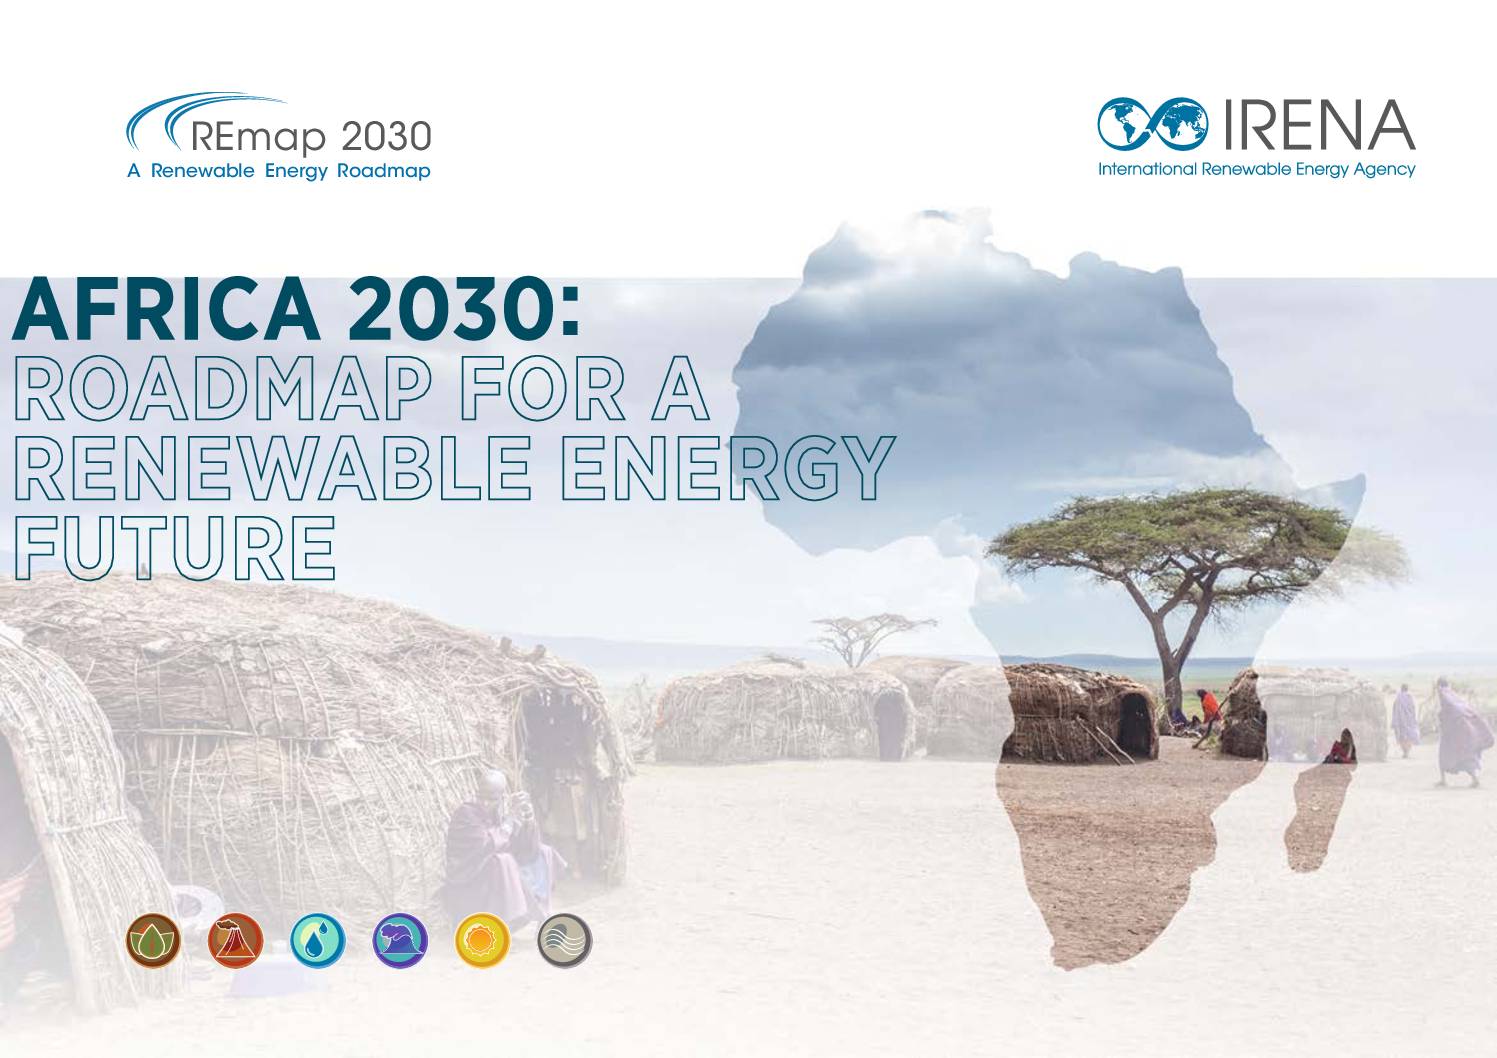 Africa 2030: Roadmap for a Renewable Energy Future